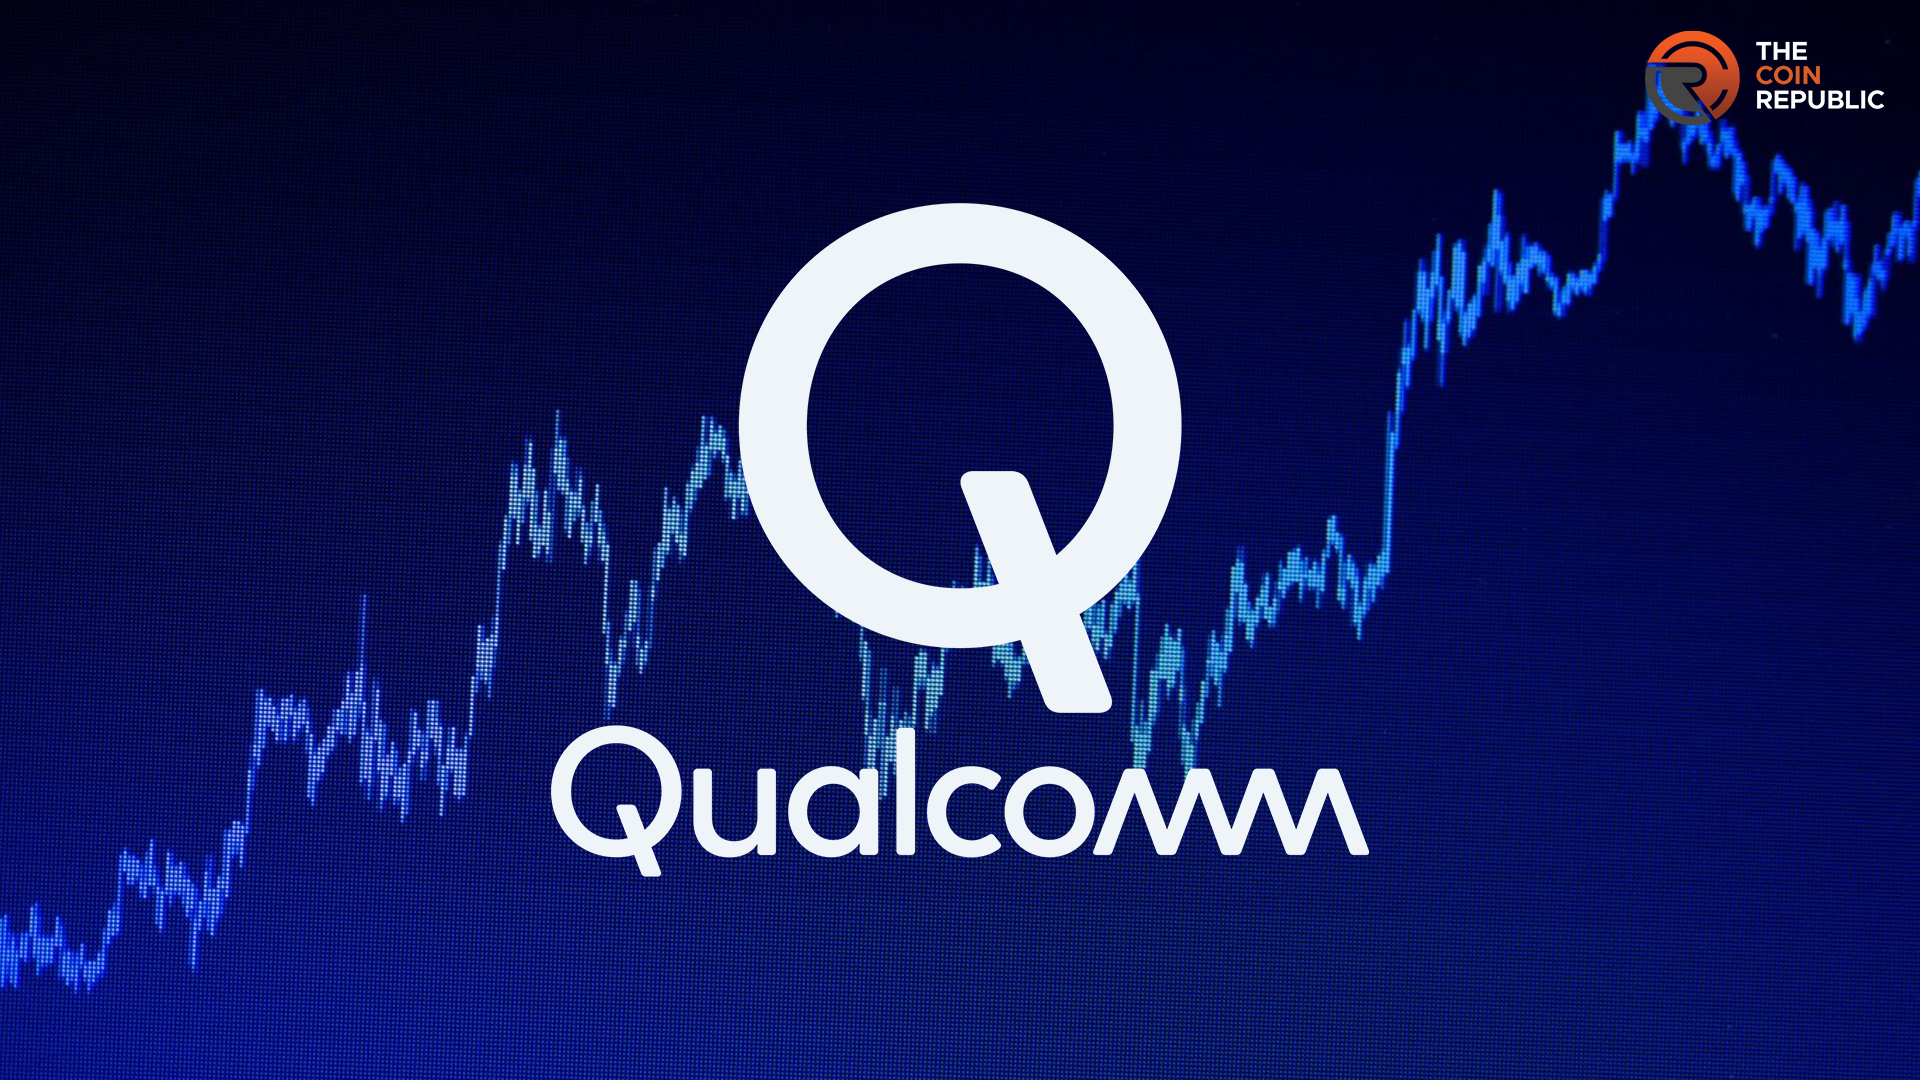 Qualcomm Stock (QCOM) Price Prediction: Outlook For This Week?